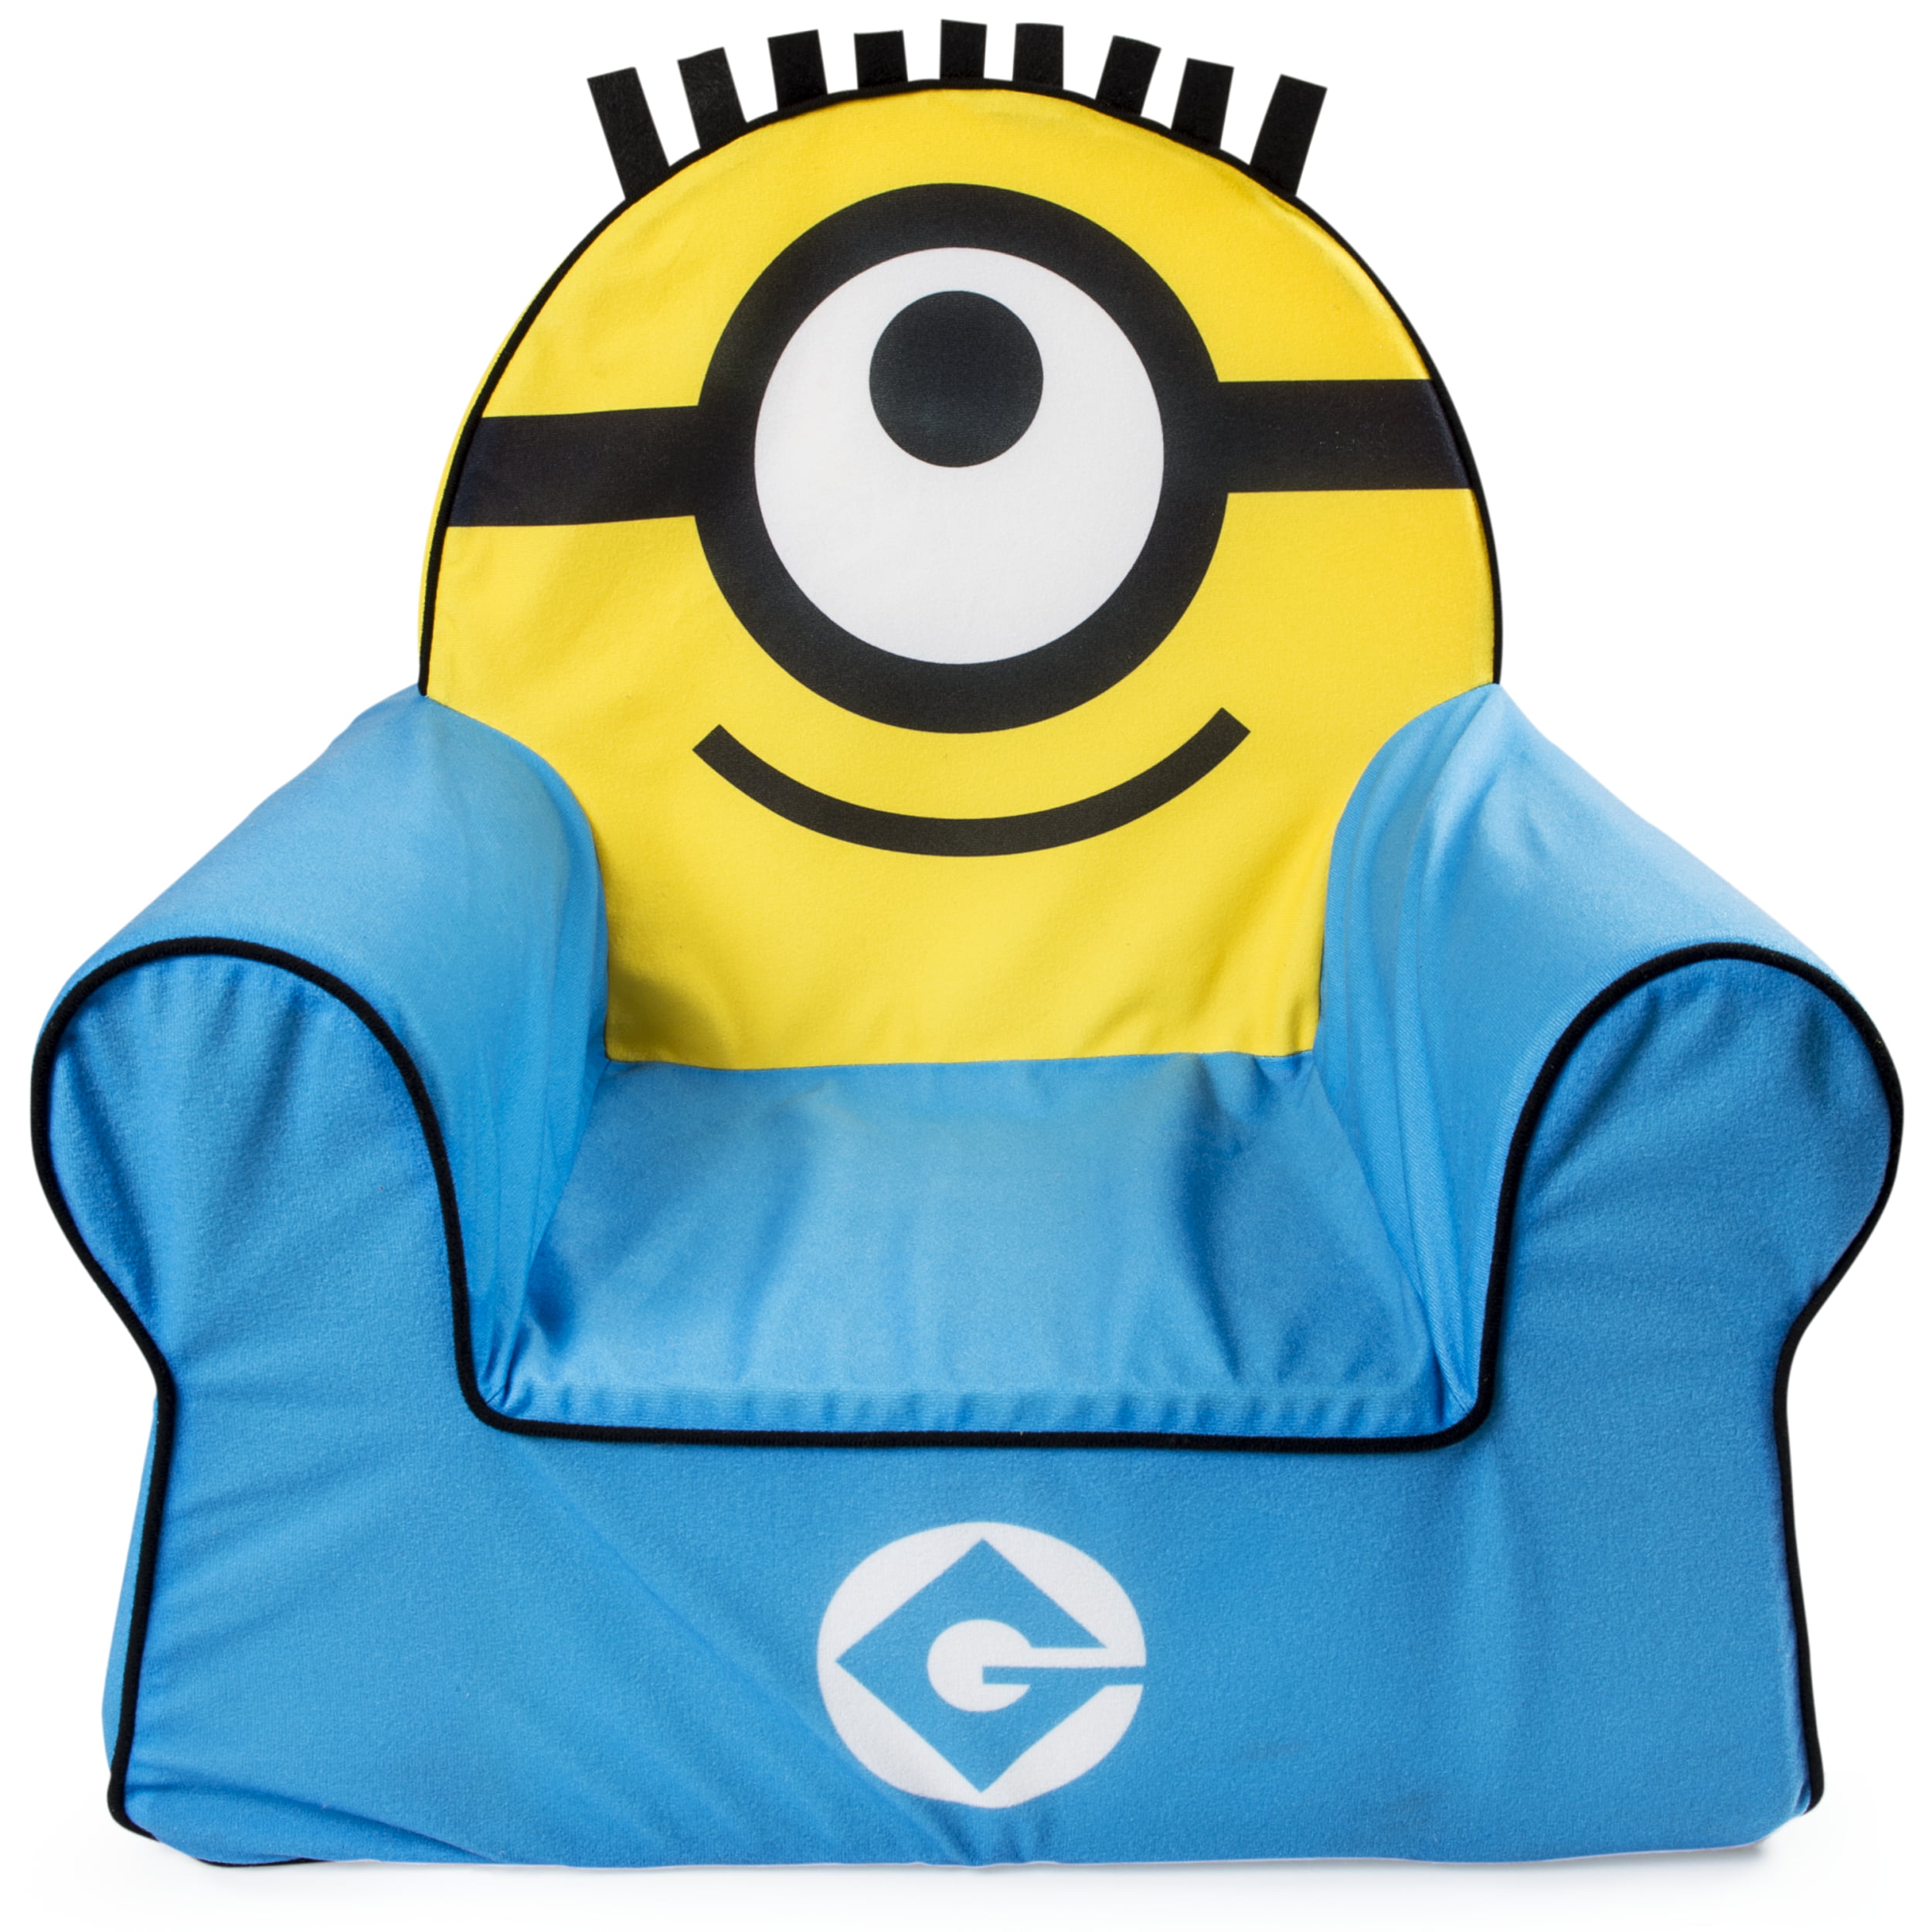 New Despicable Me Minions Inflatable Kids Chair Beach Pool Lounger Sofa Seat 6y 